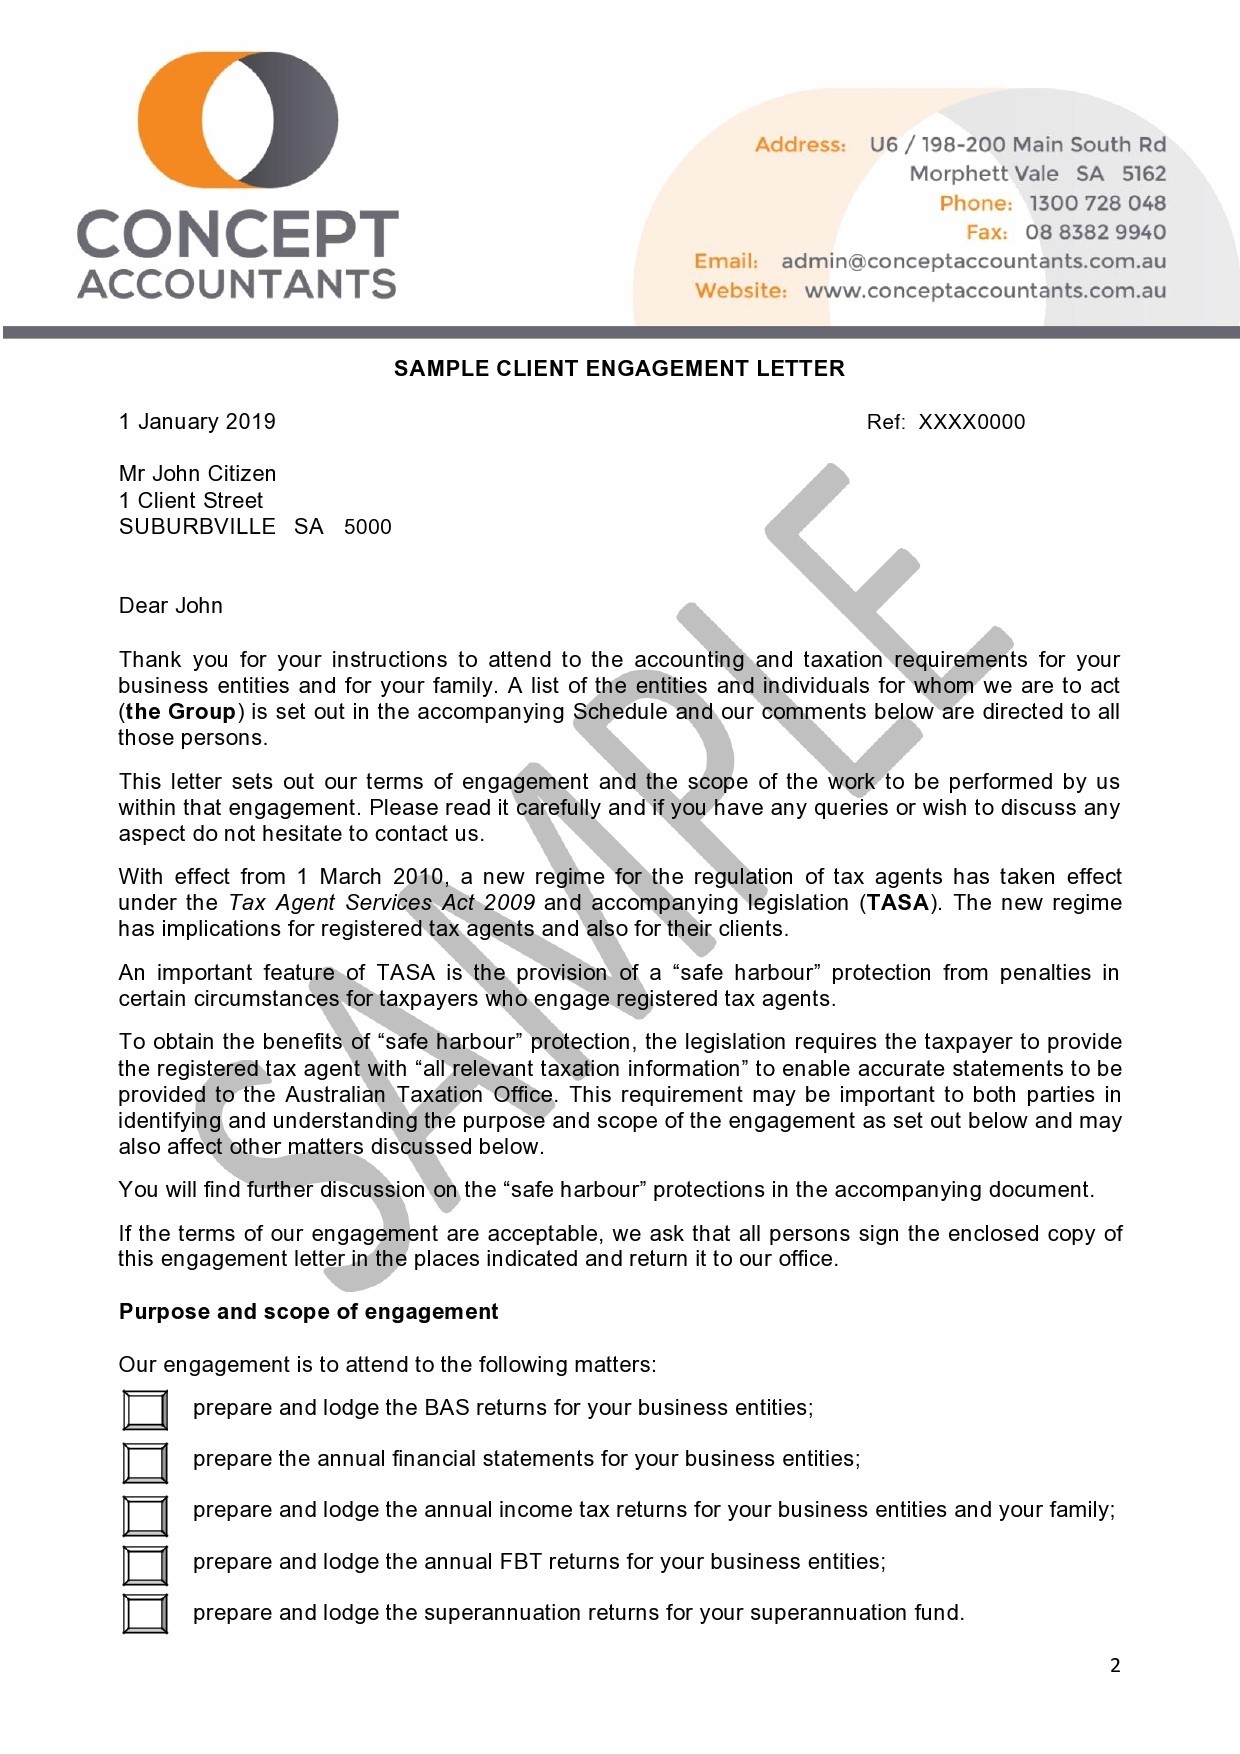 Accounting Services Engagement Letter from templatelab.com